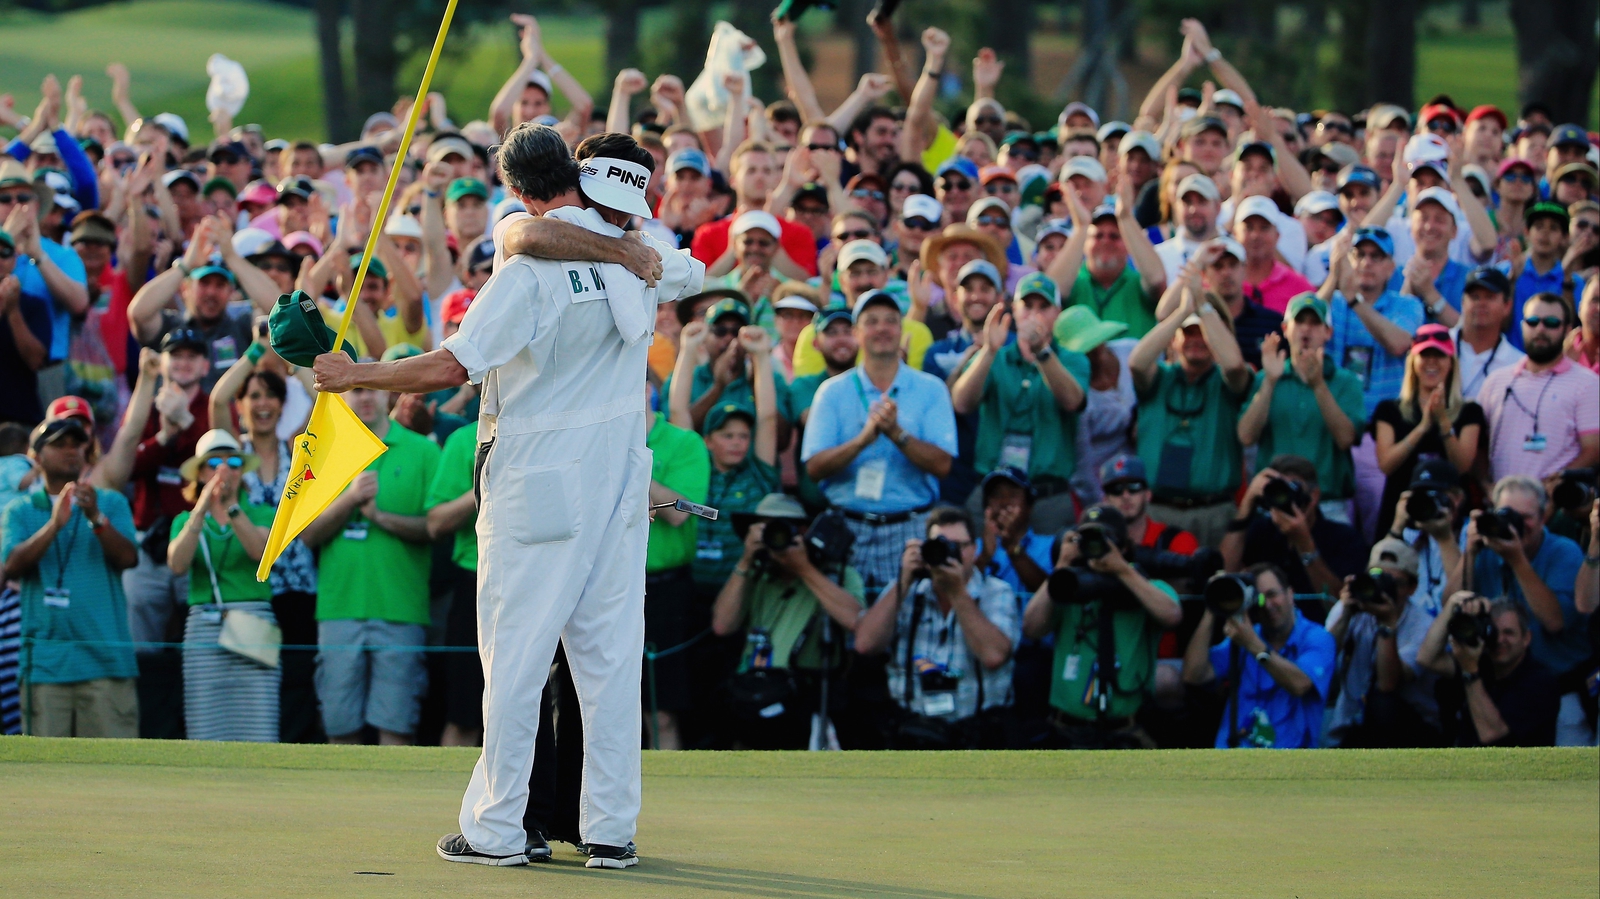 As it happened Bubba Watson wins the Masters